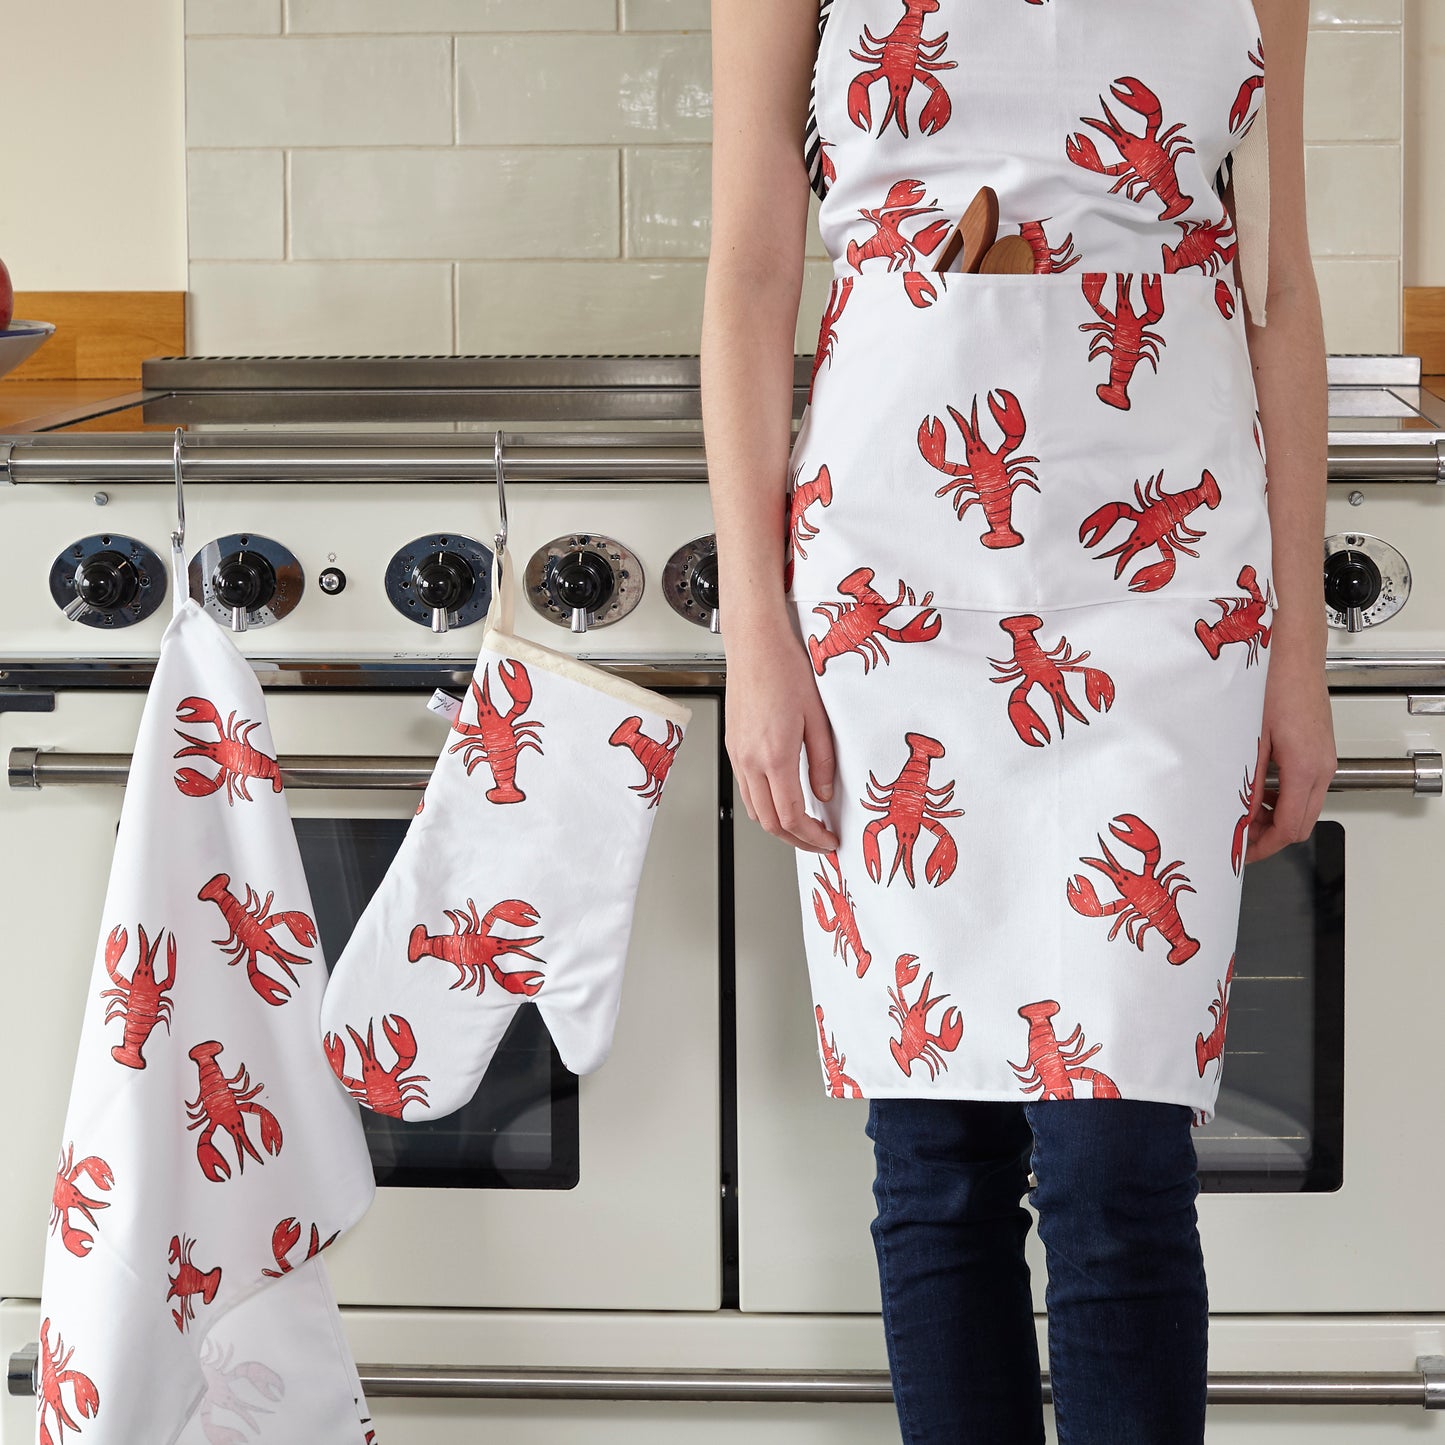 lobster print apron , lobster oven glove and lobster tea towel in the kitchen